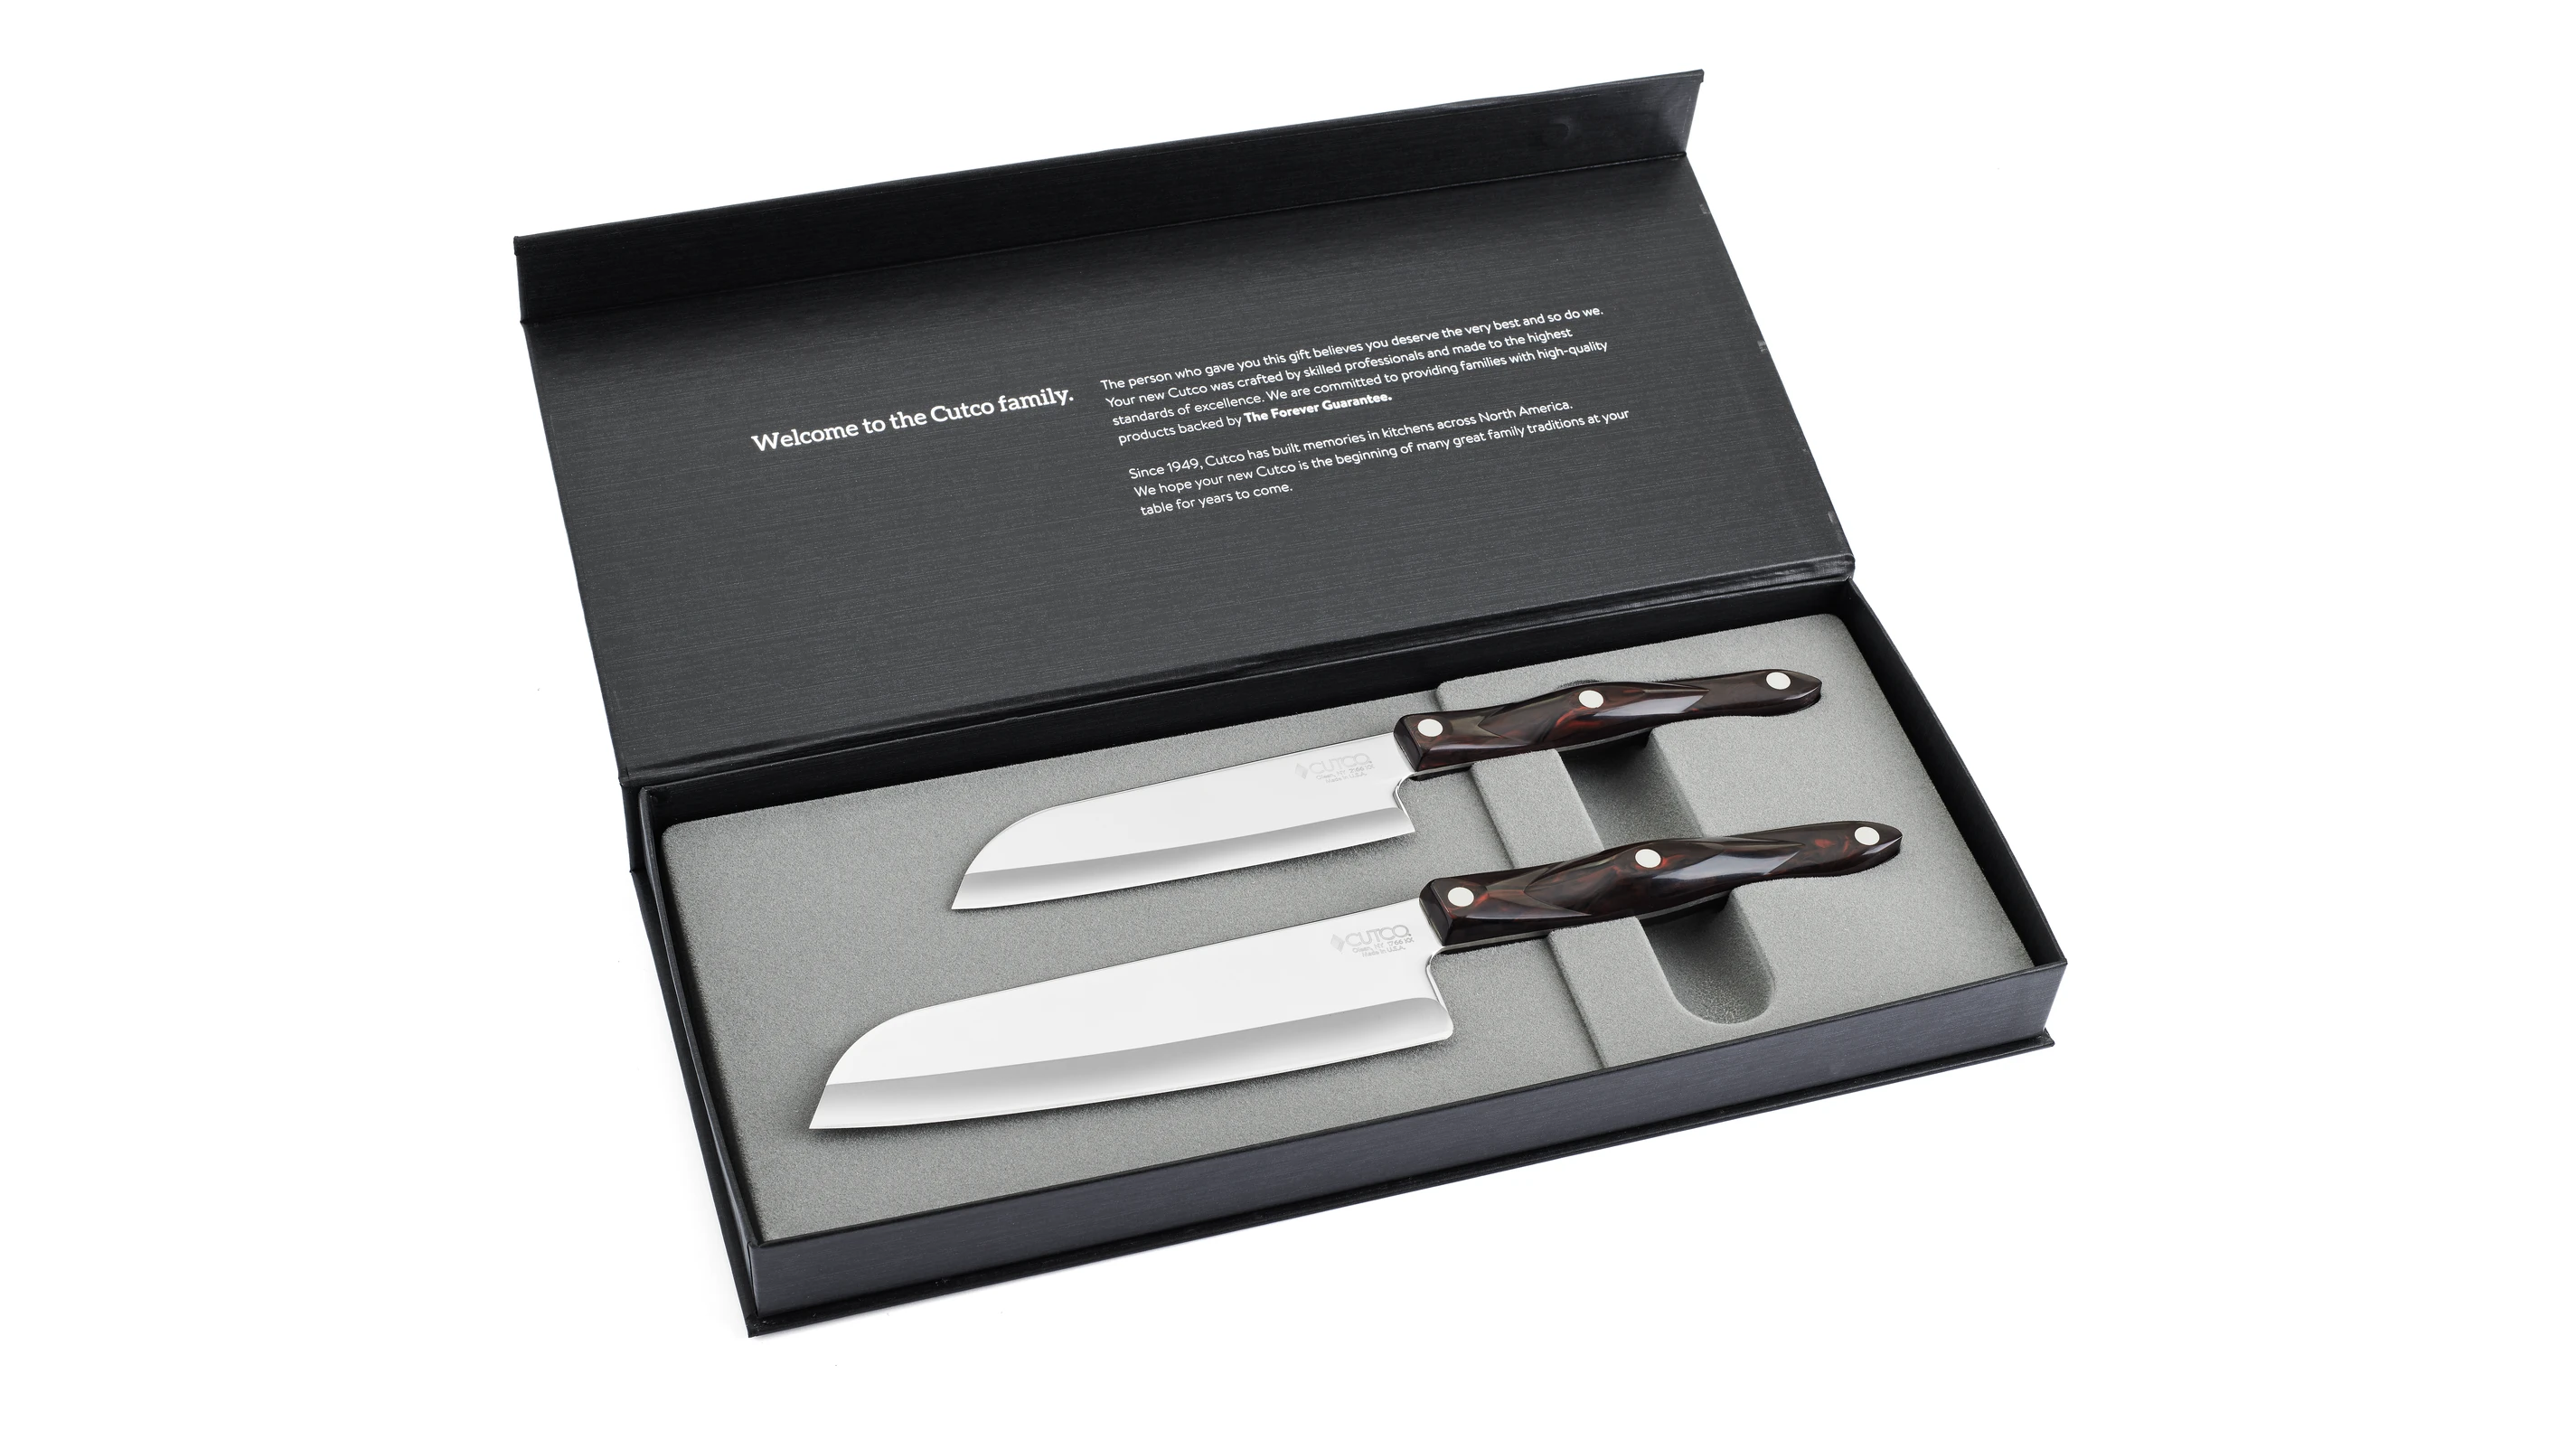 Our Table 2 Piece Stainless Steel Santoku Knife Set